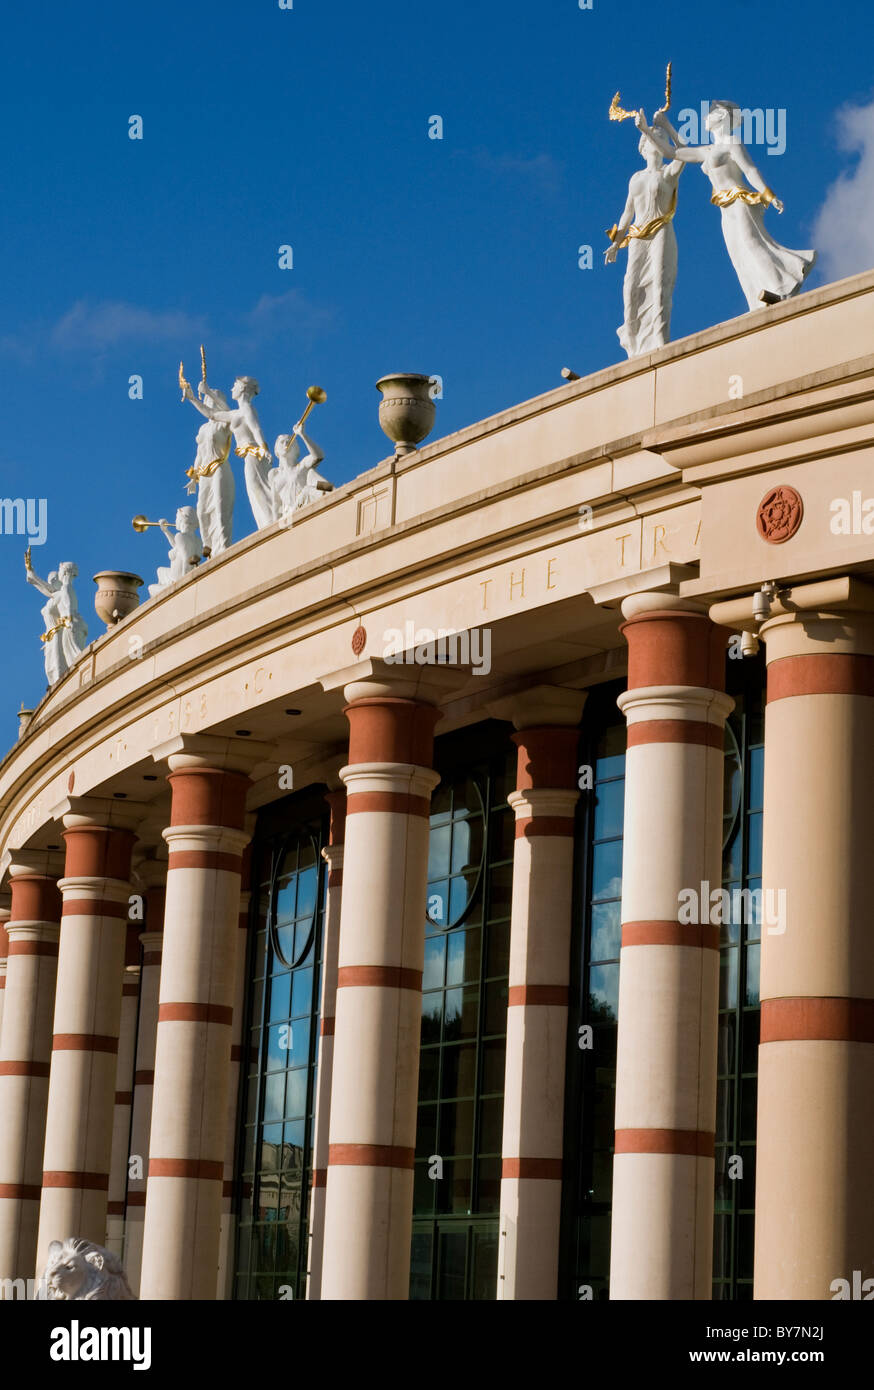 The Trafford Centre shopping mall in Manchester, England Stock Photo